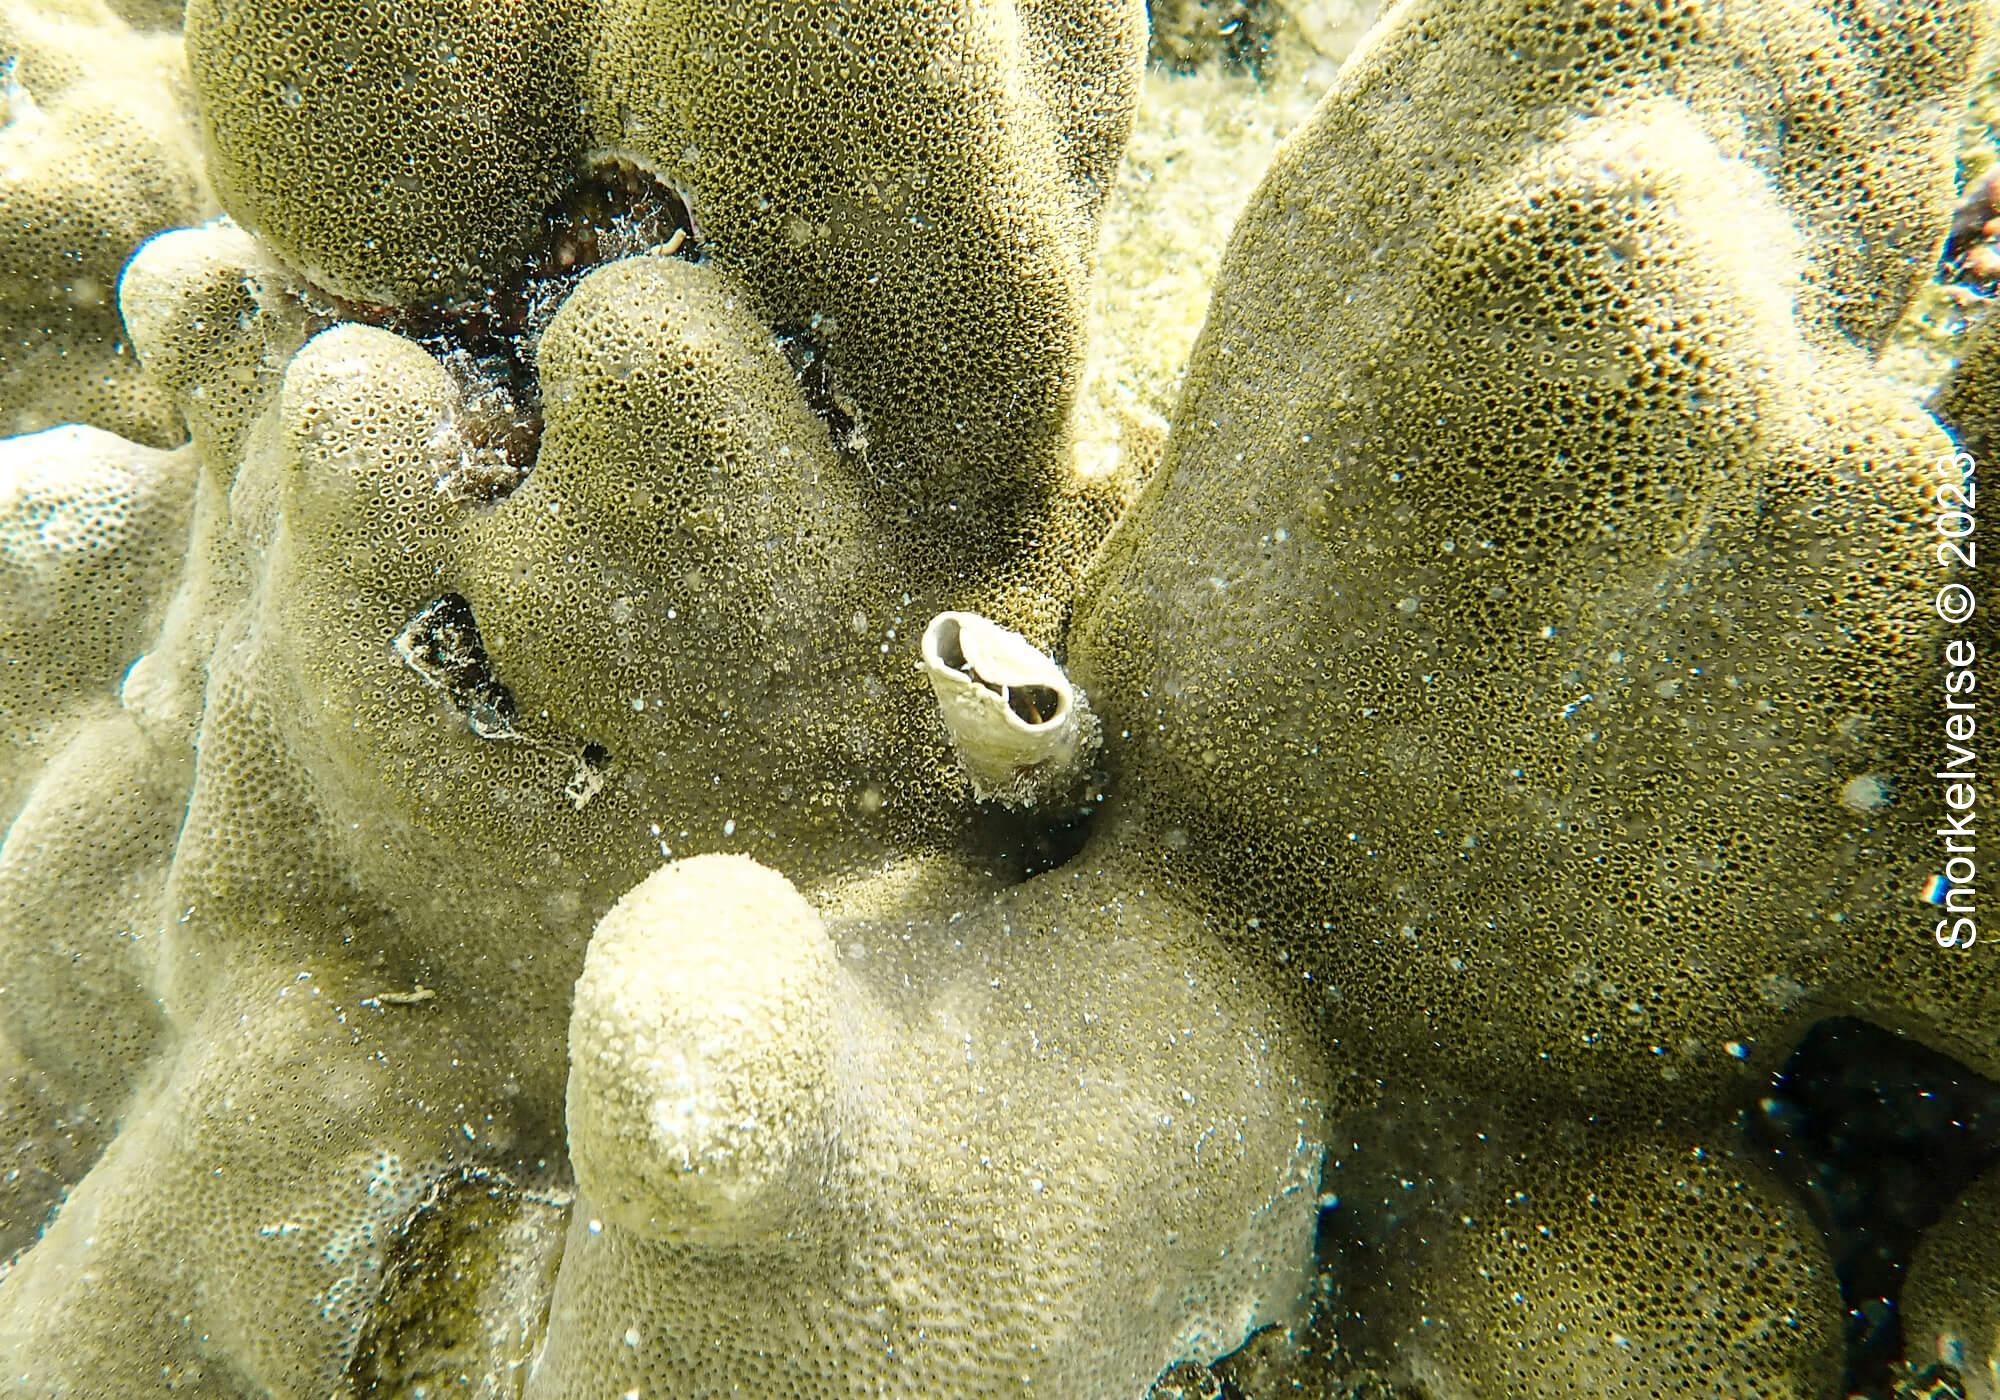 Feather Duster Worm retracted, Sunset Beach, Koh Lipe